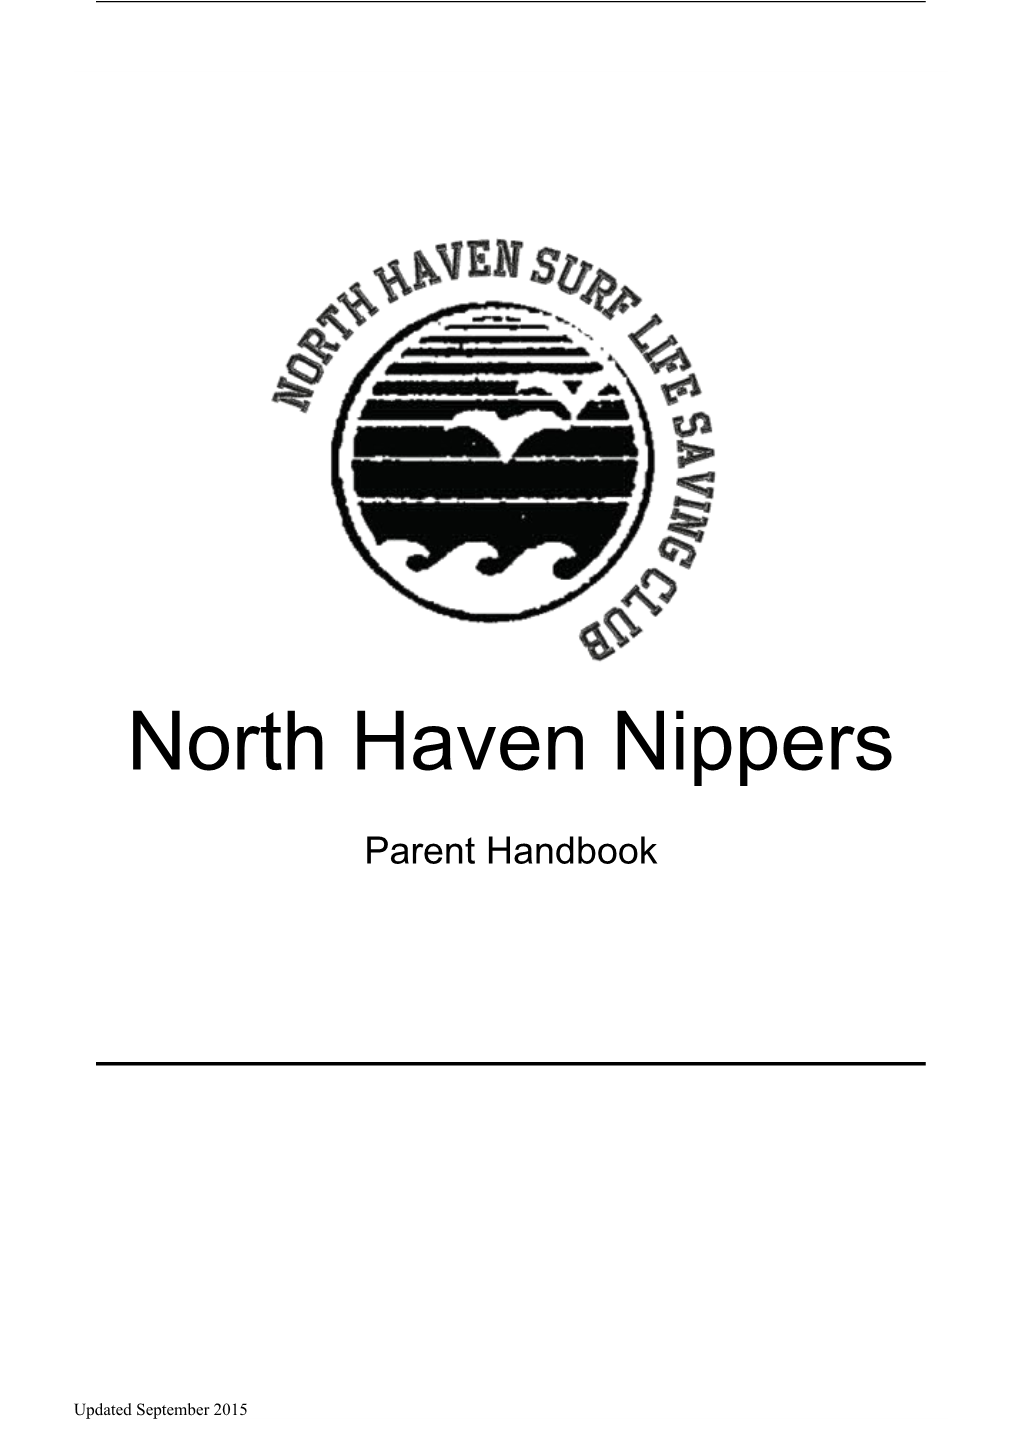 North Haven Nippers